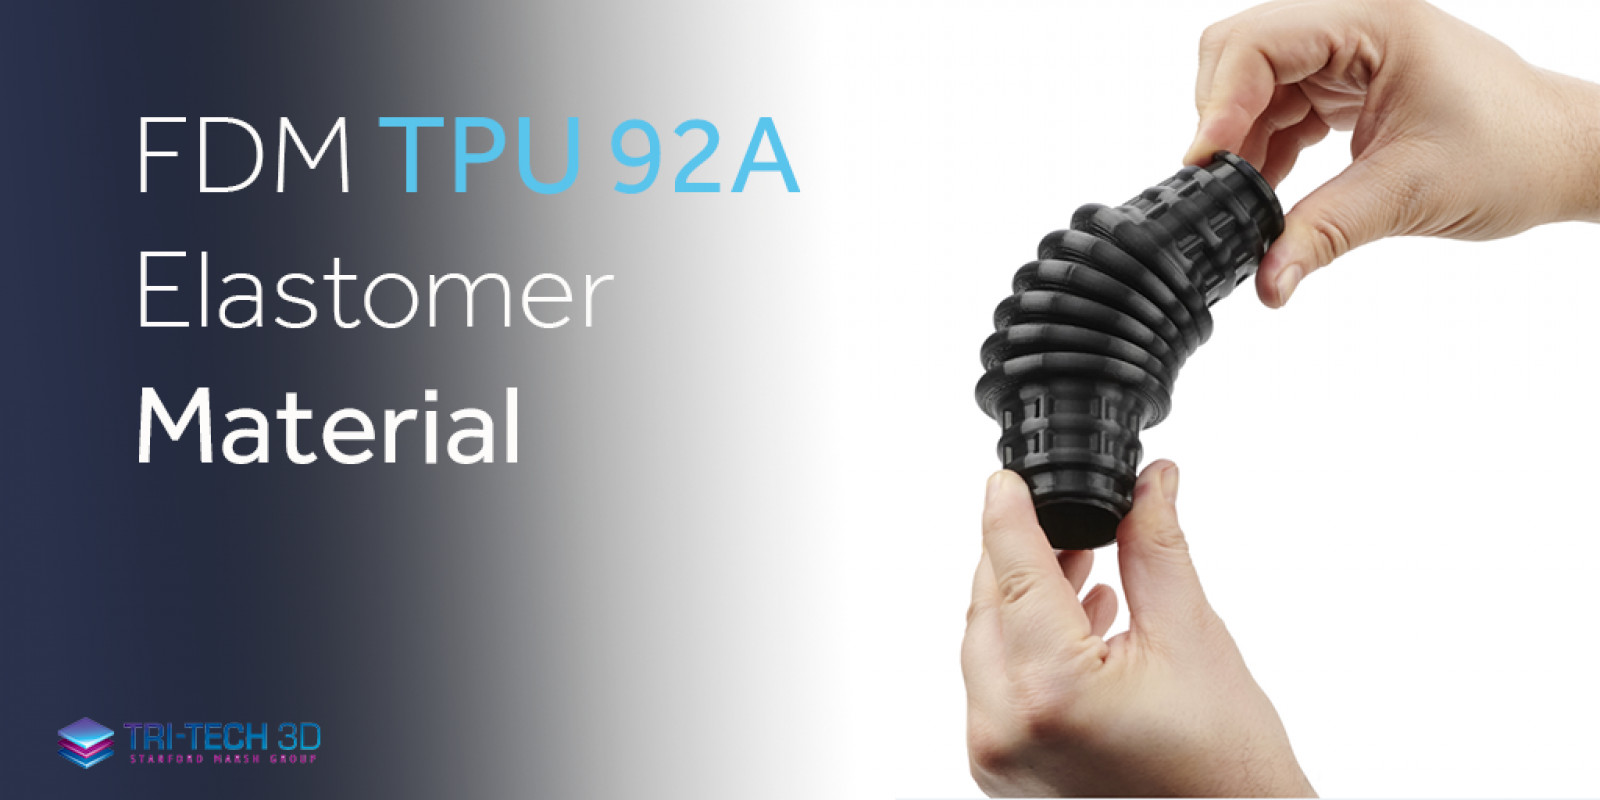 TPU 92A – INTRODUCING STRATASYS’S NEW FDM MATERIAL